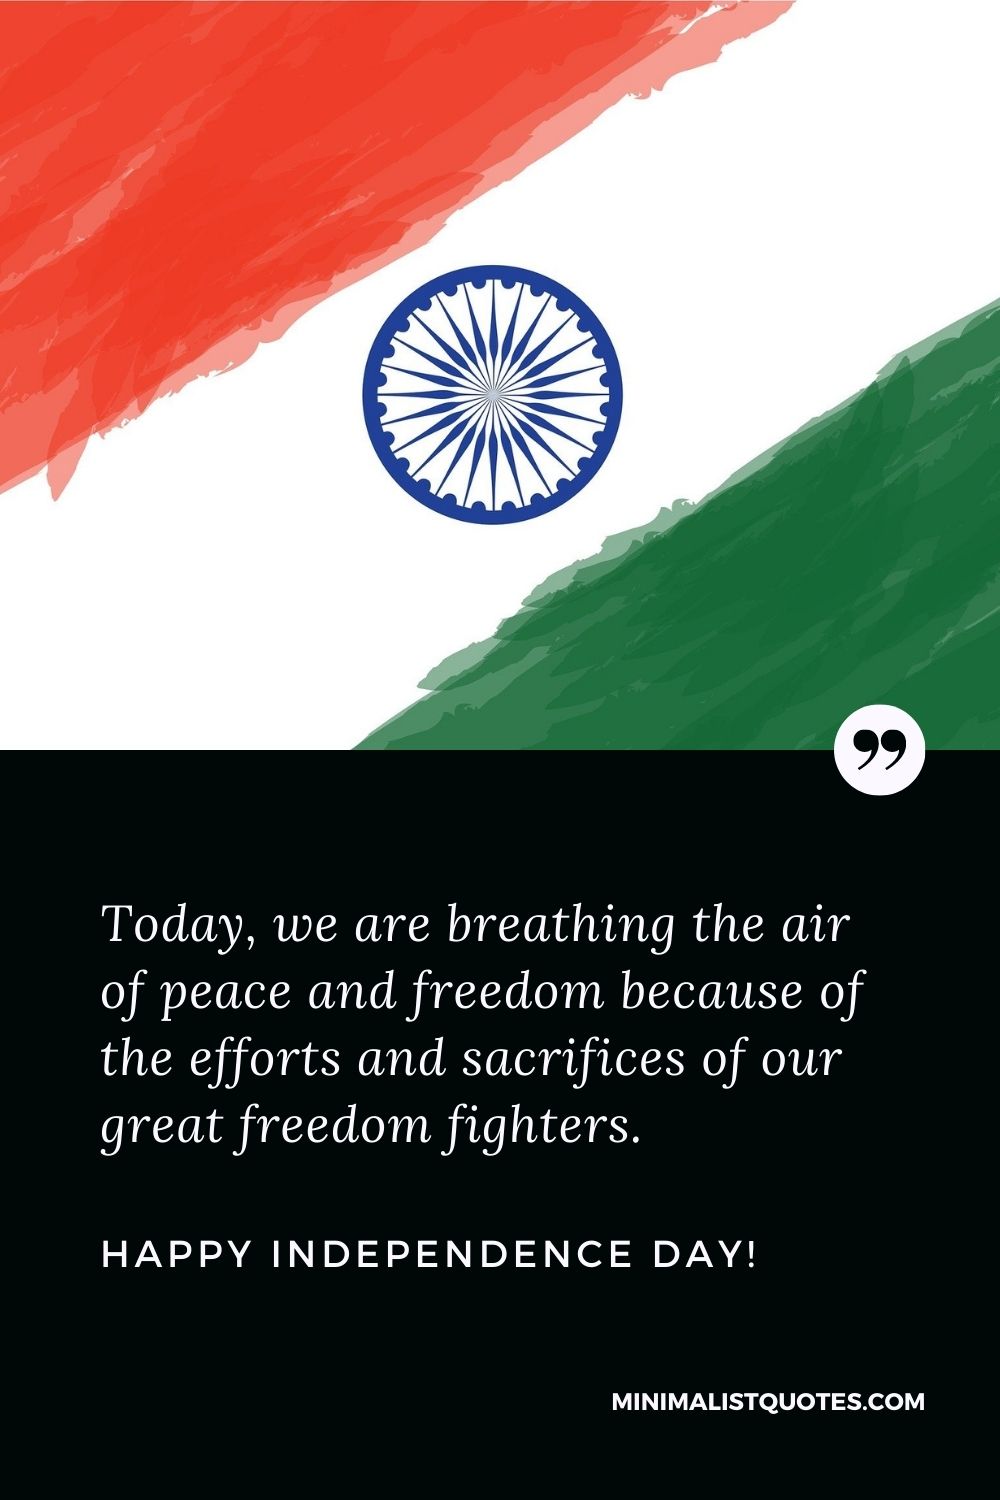 Today, we are breathing the air of peace and freedom because of ...